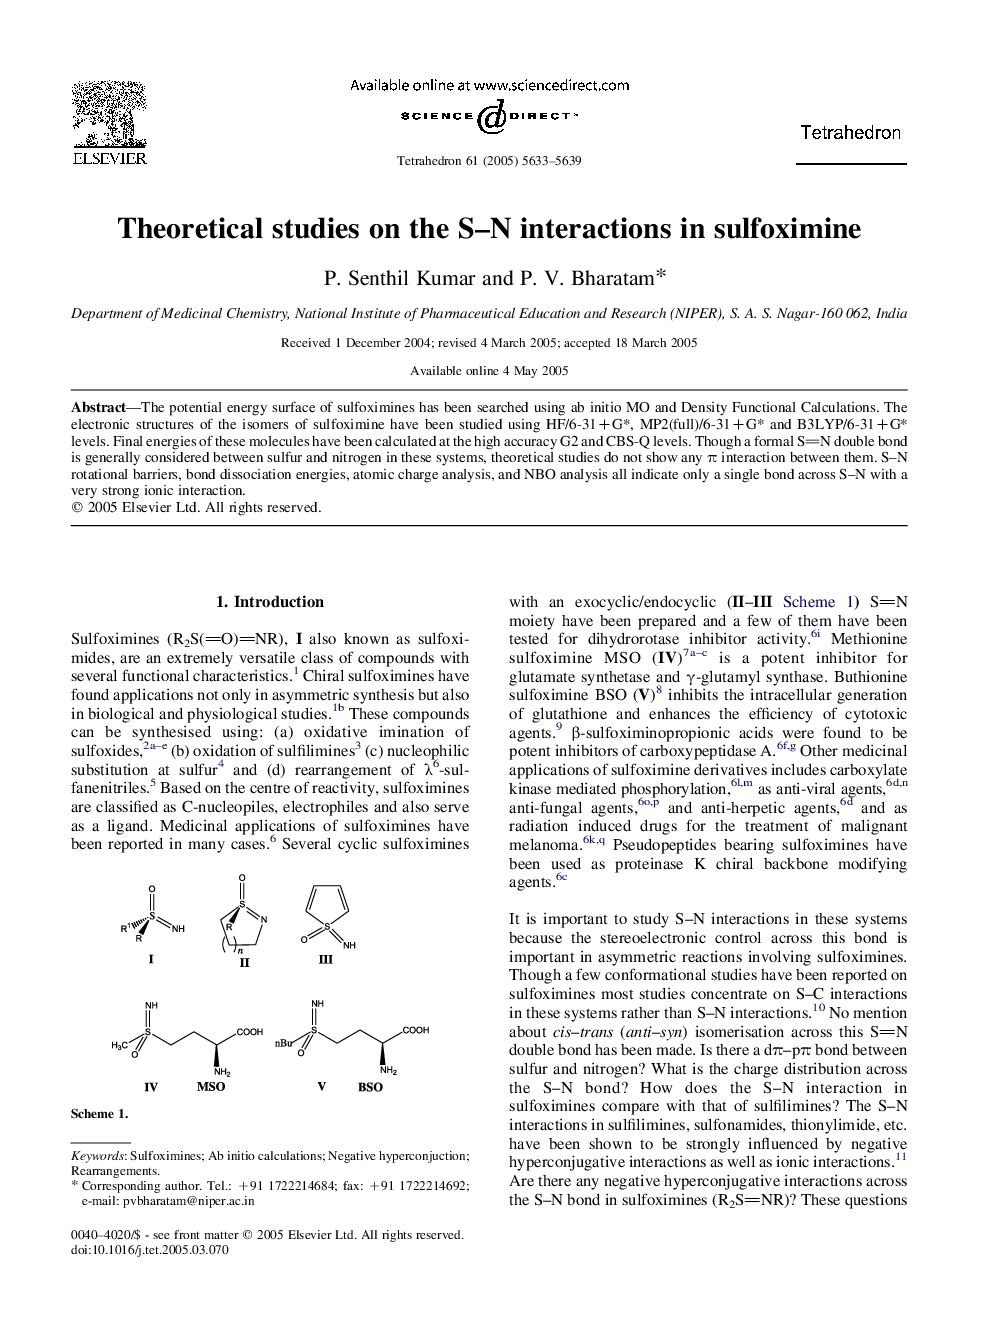 Theoretical studies on the S-N interactions in sulfoximine